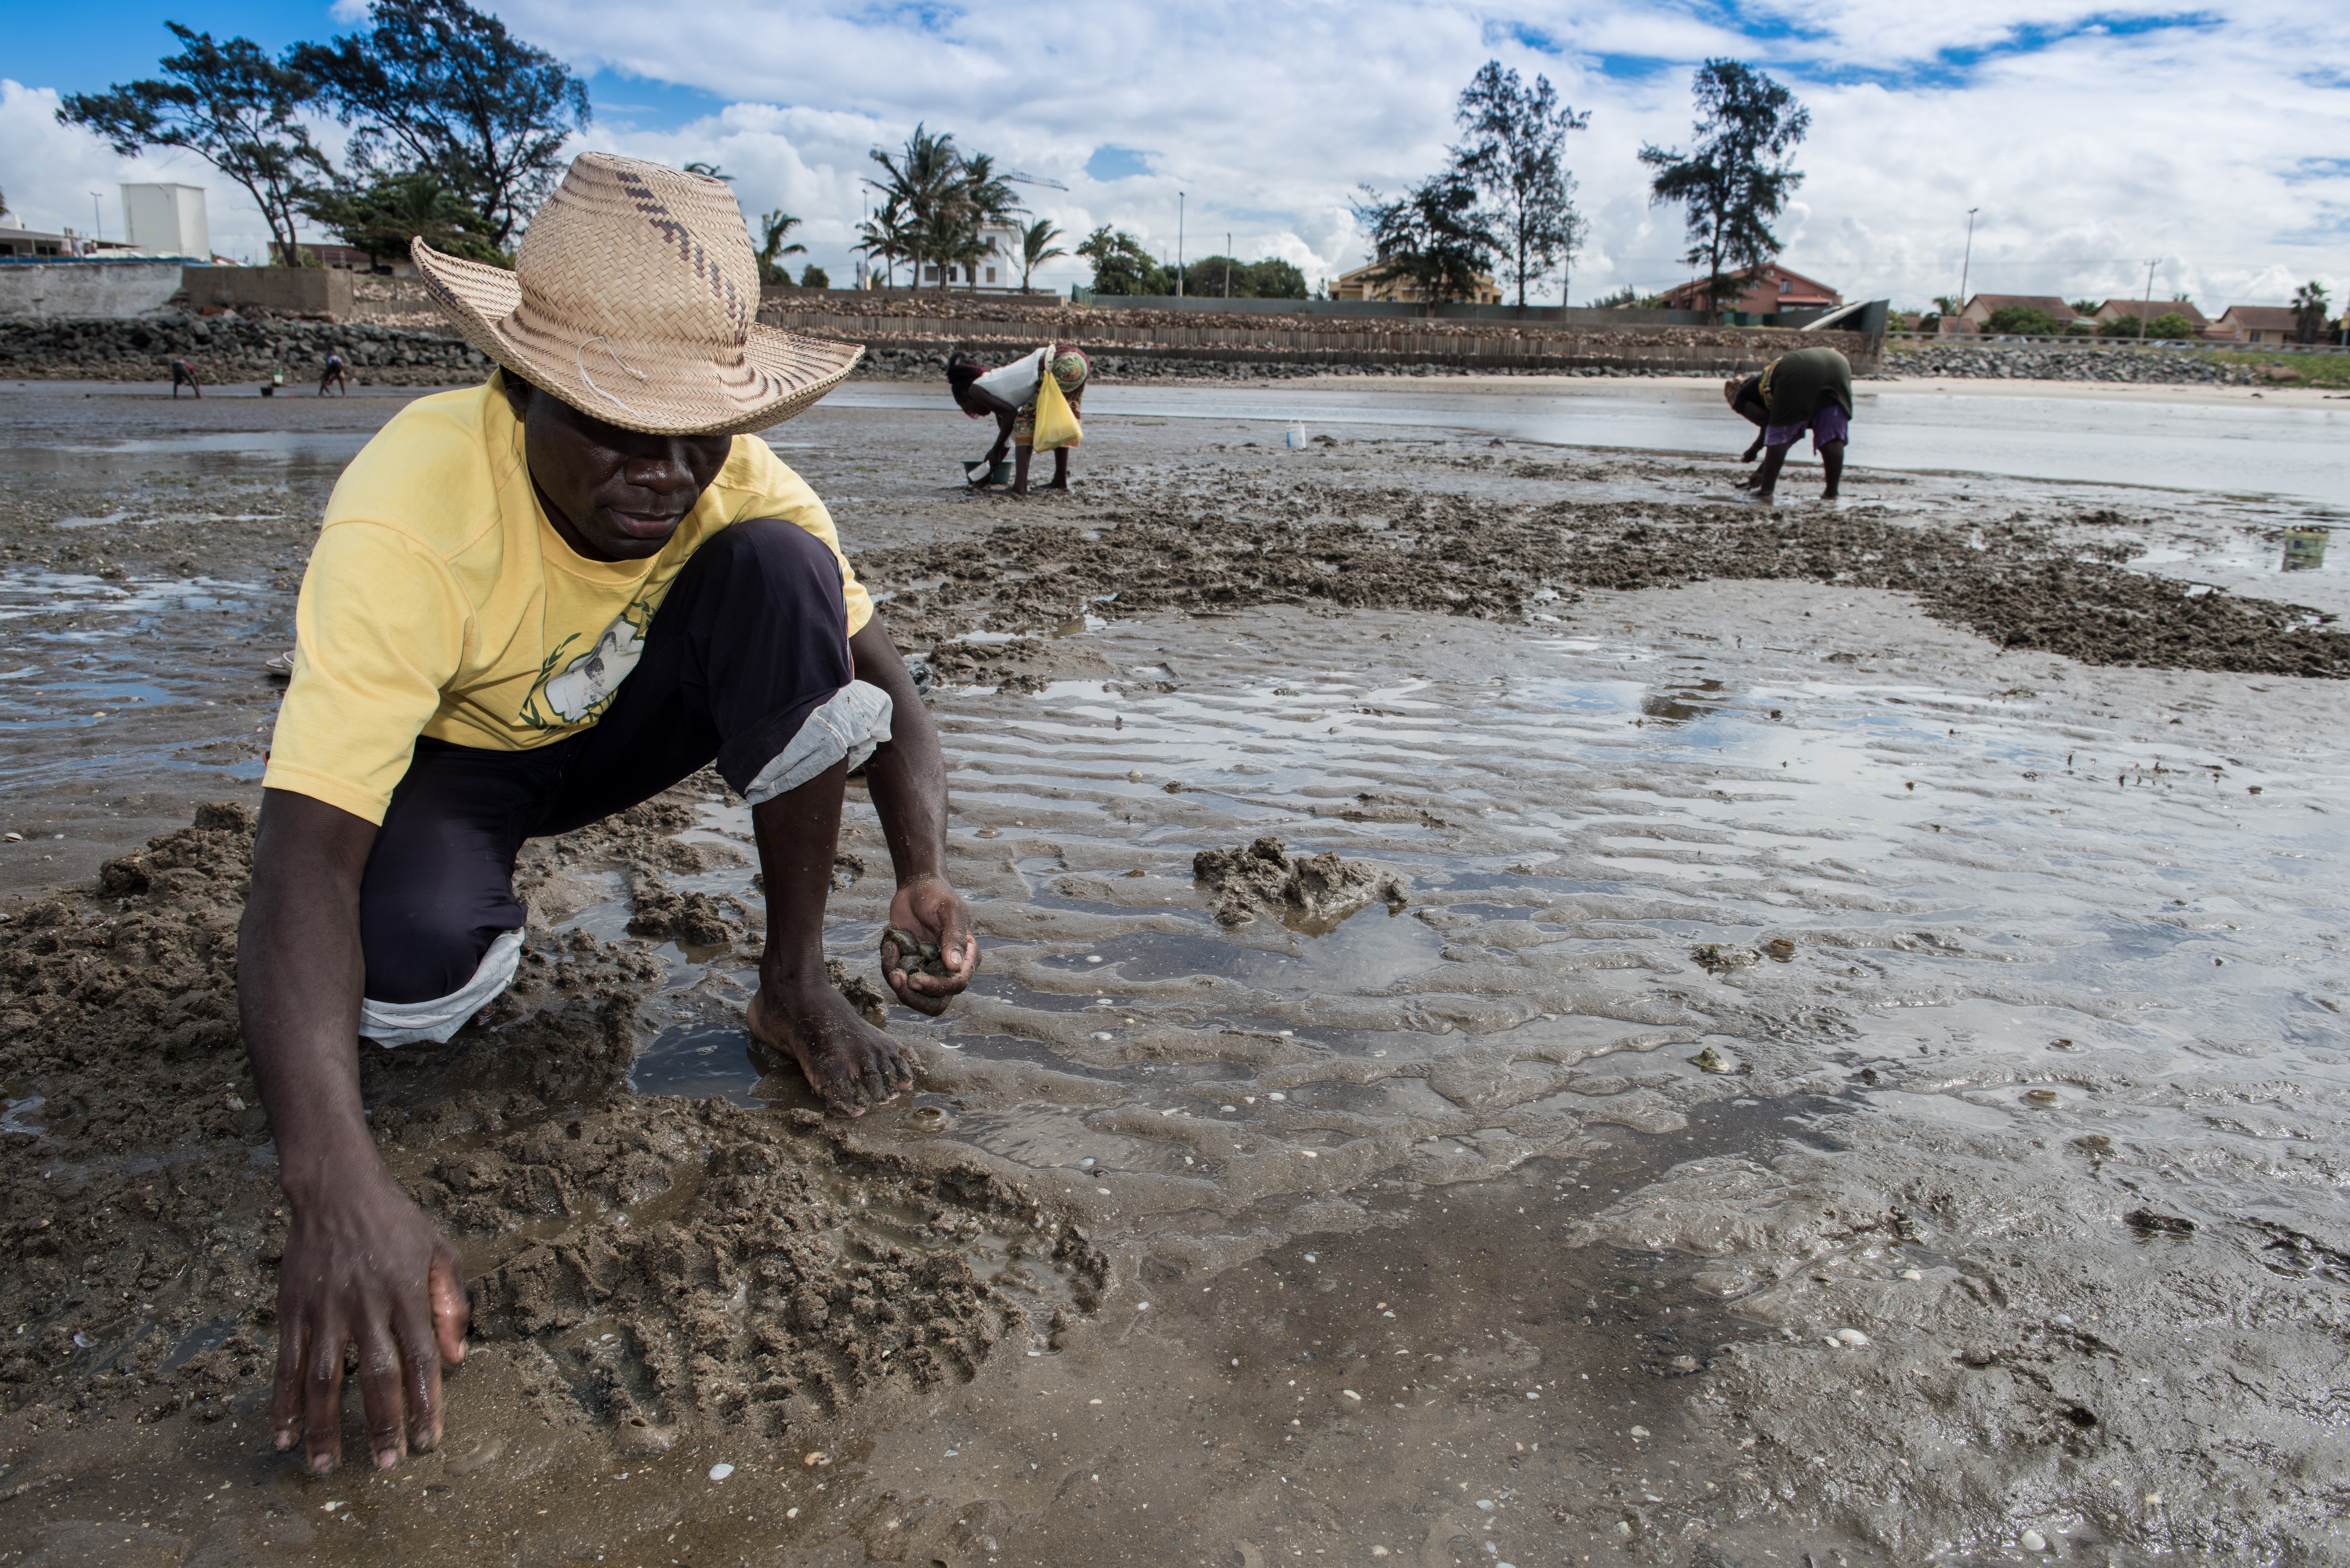 Clam pickers at low tide in the Mozambique capital of Maputo